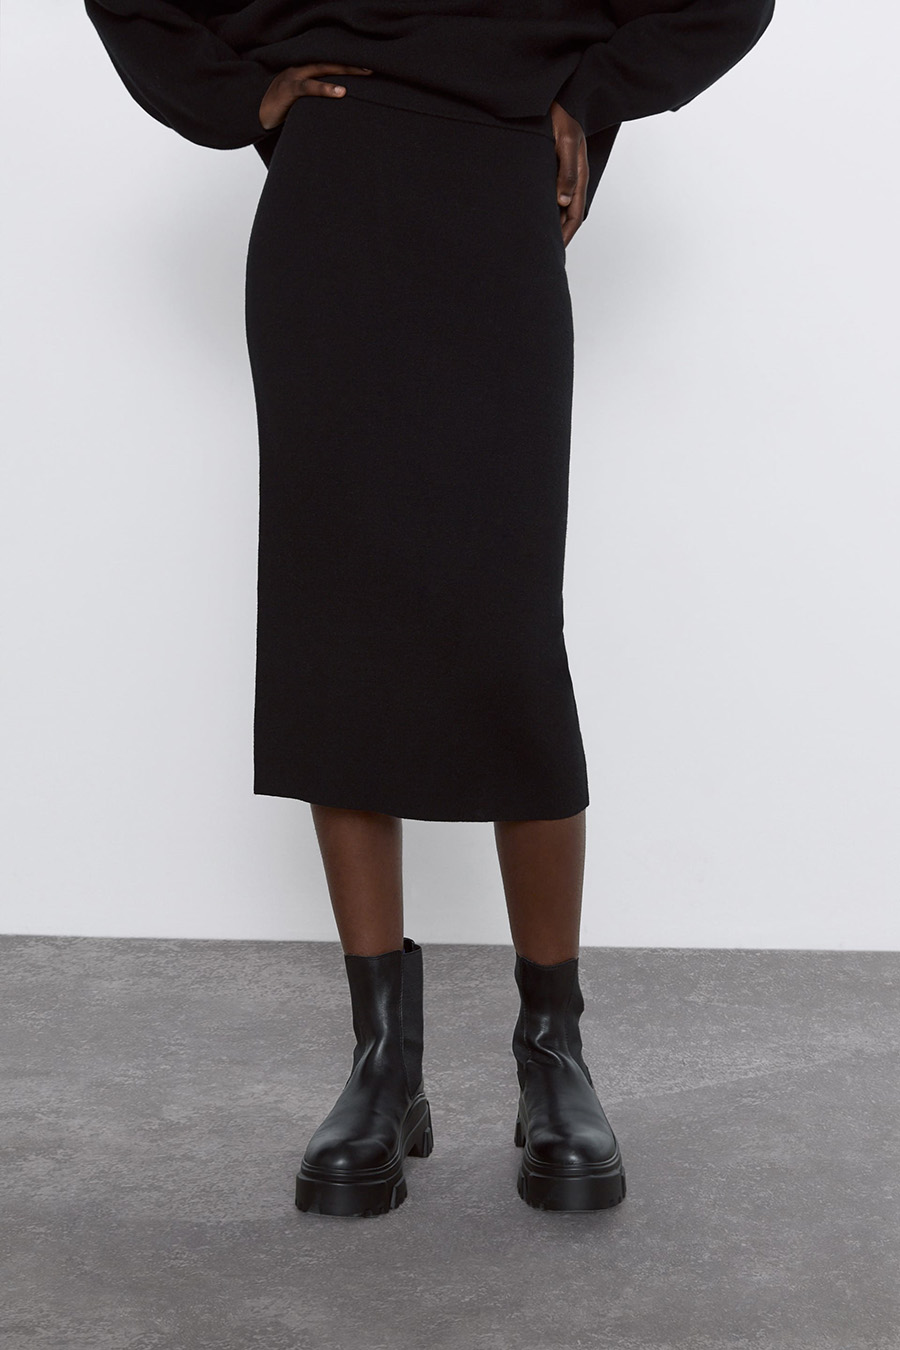 Fashion Black Knit Solid Color Straight Skirt,Skirts